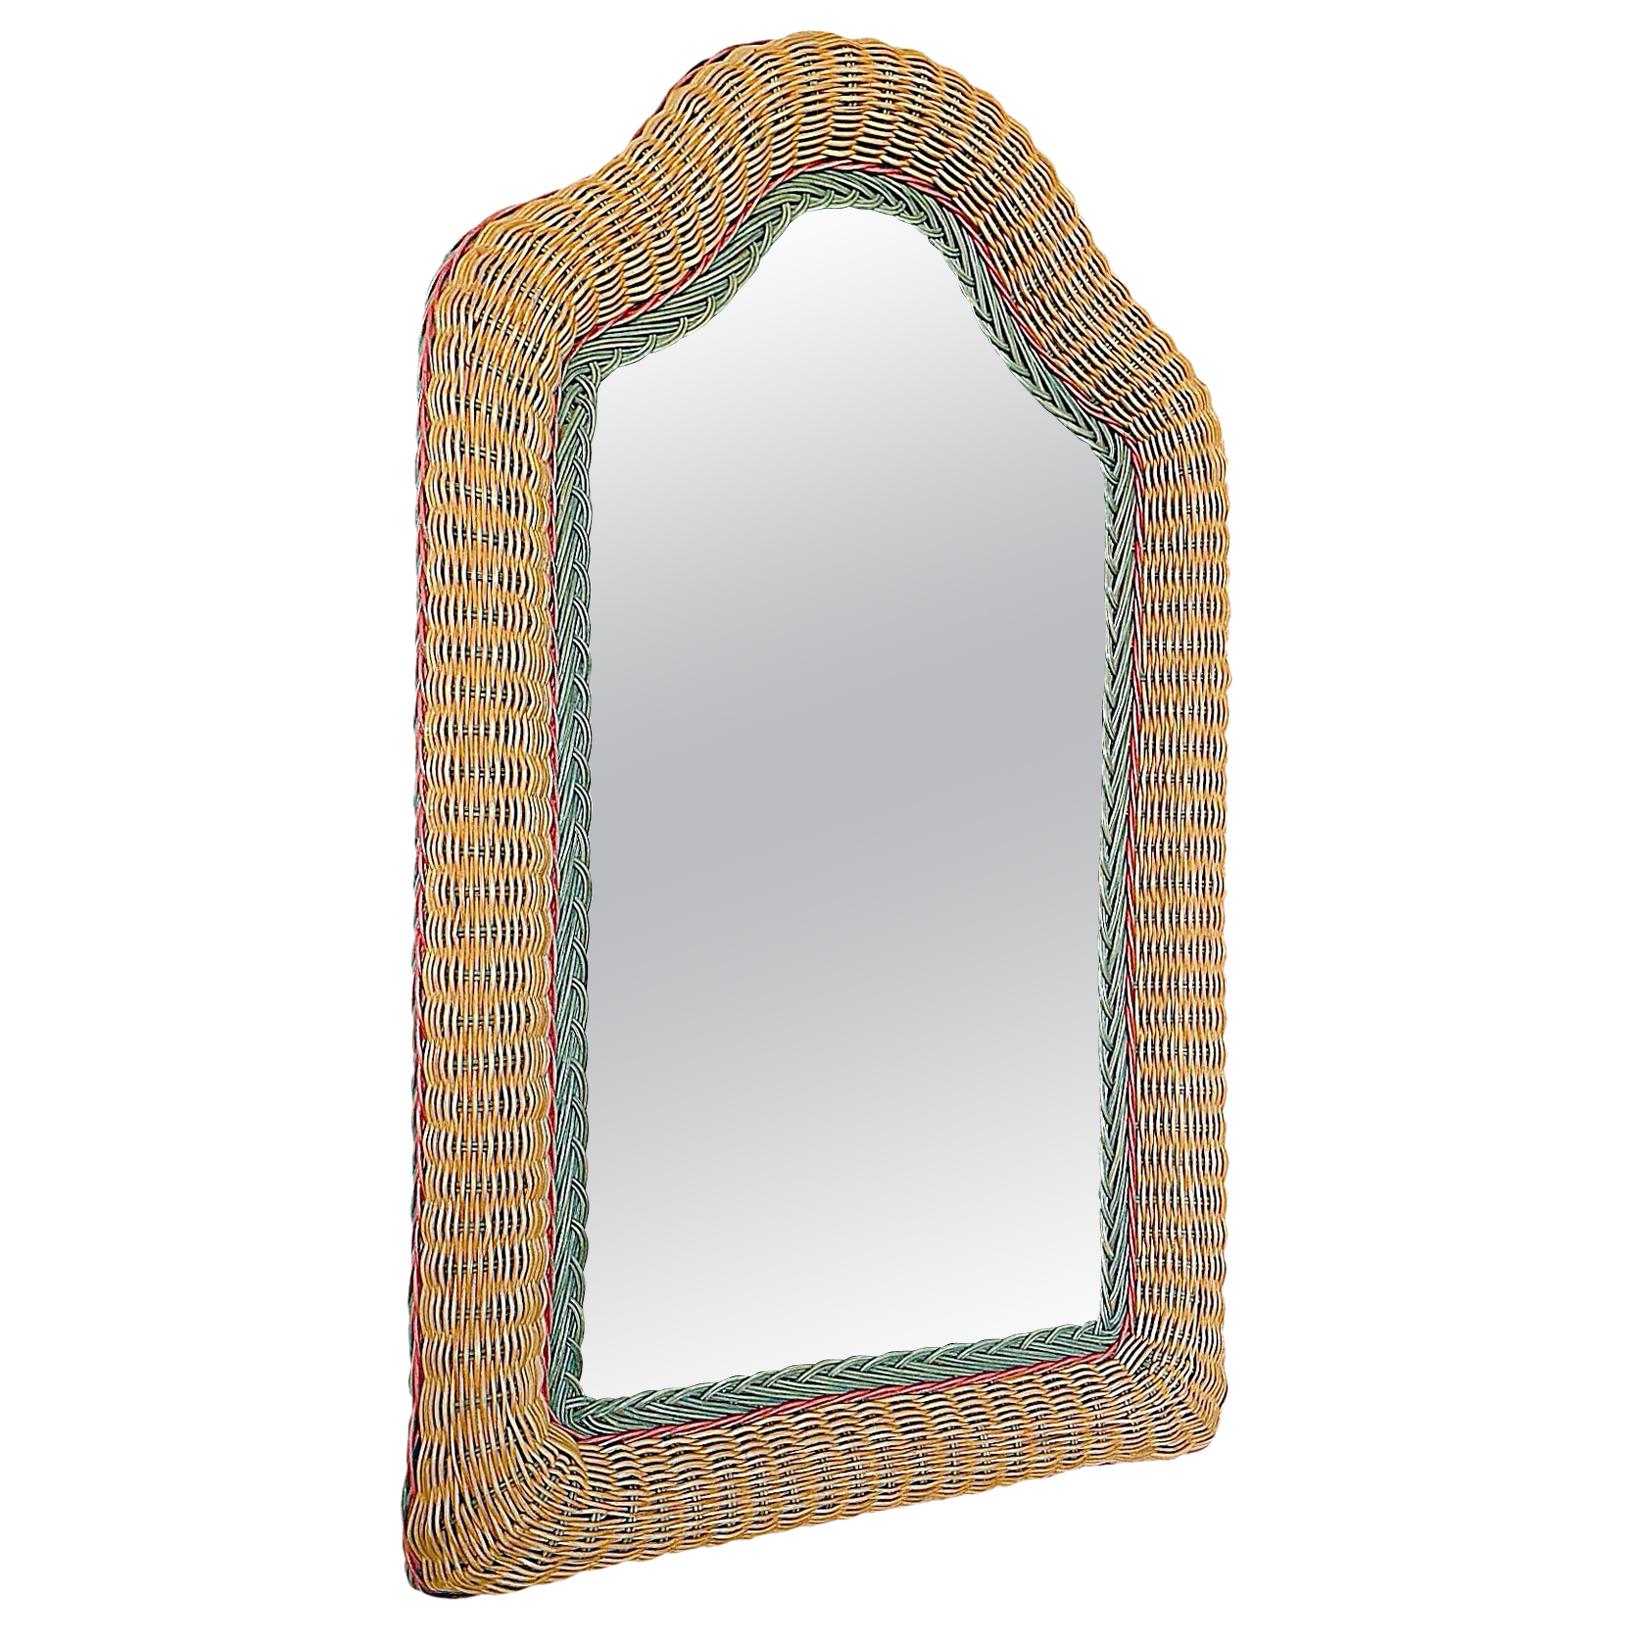 Artisanal Wicker Rattan Midcentury Arched Wall Mirror, 1960s, France For Sale